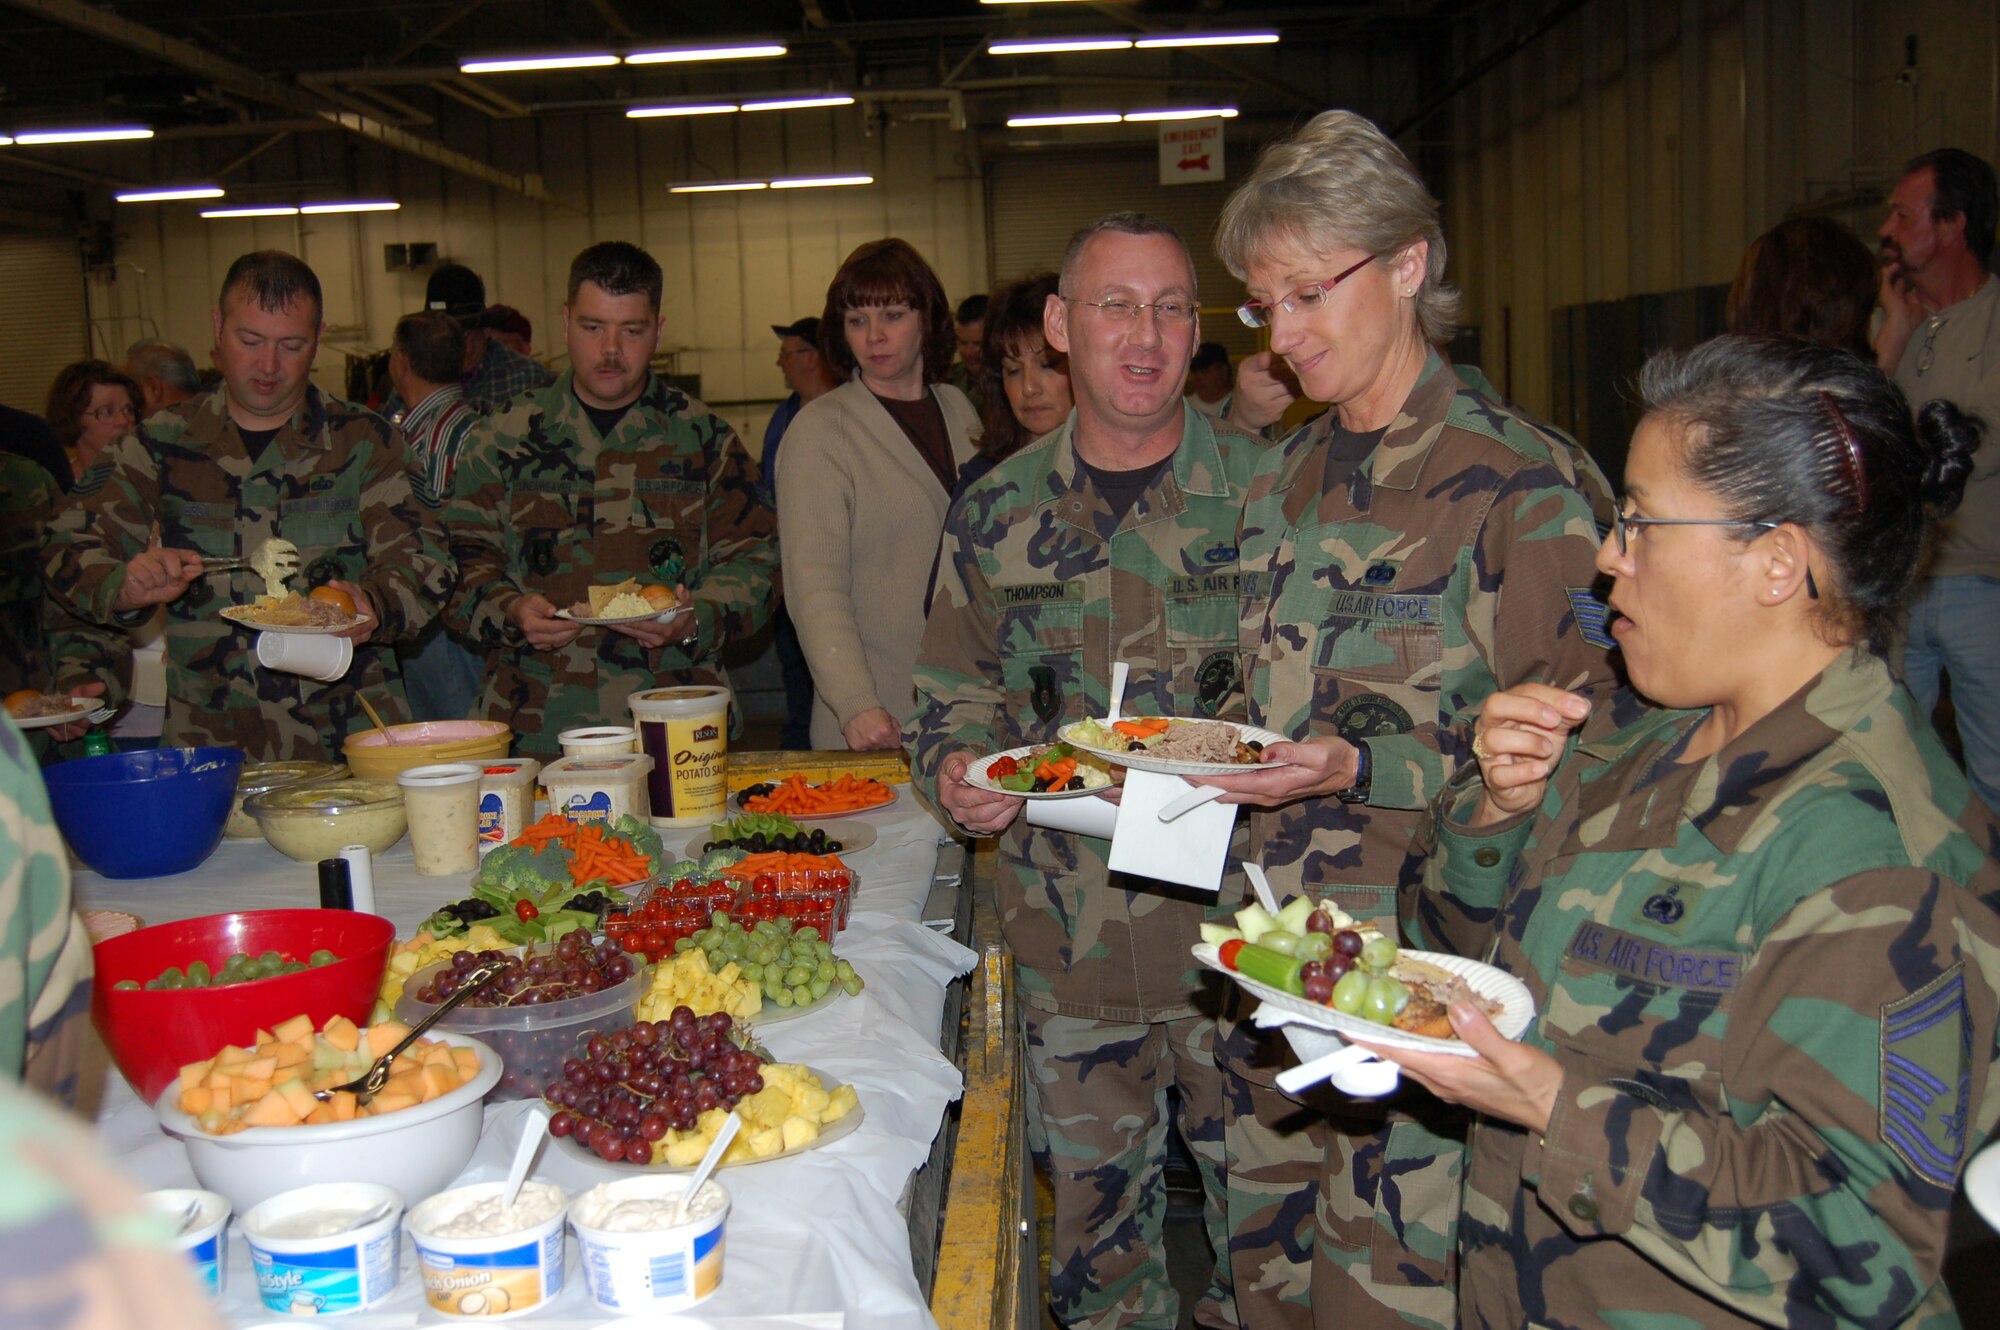 Senior Master Sgt. Deborah Francavilla, Tech. Sgts. Lynn Fyanes, and Andrew Thompson, from the 75th Logistics Readiness Squadron at Hill AFB, UT., were among the first in line to grab a bite to eat from the food spread that was laid in honor of Airmen who recently returned home. Sergeant Francavilla and Thompson were deployed to Qatar and Sergeant Fyanes deployed to Kuwait.